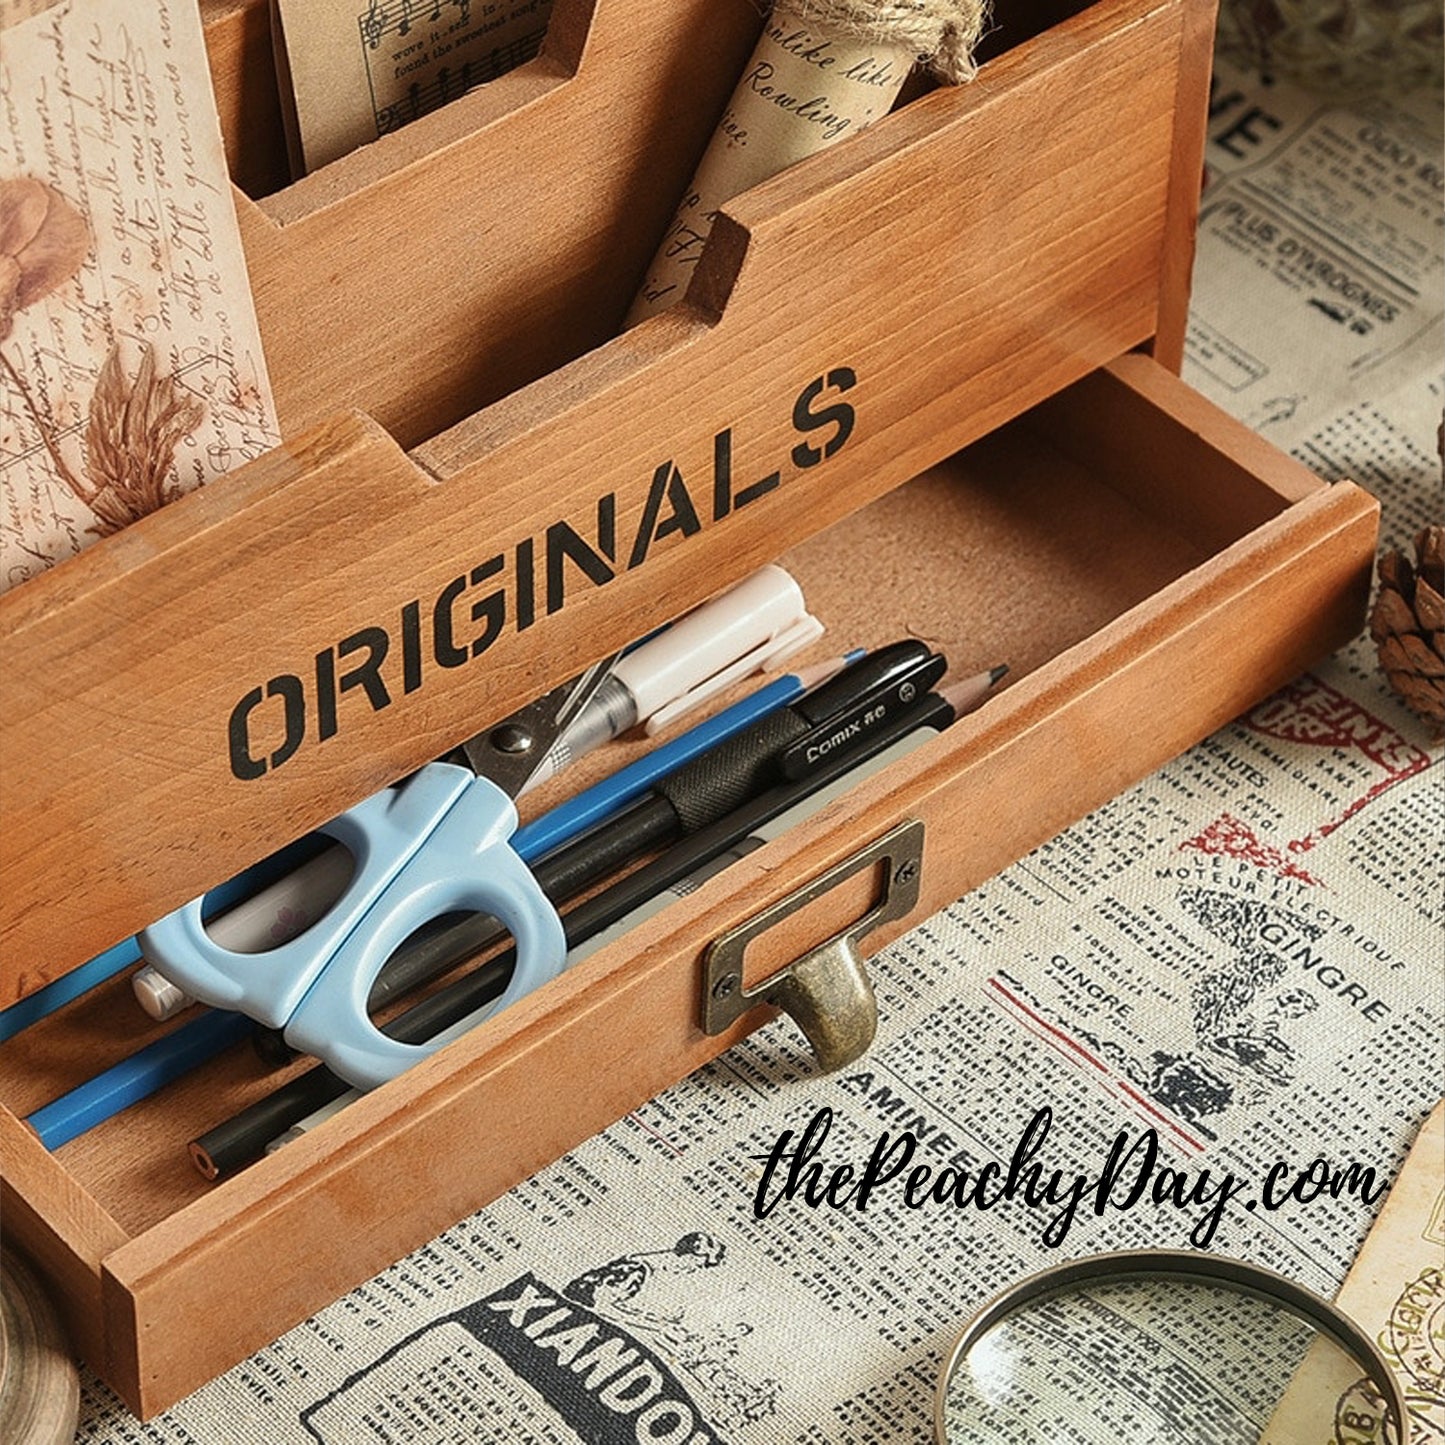 Vintage Wooden Organizer with Drawer for Mails Files